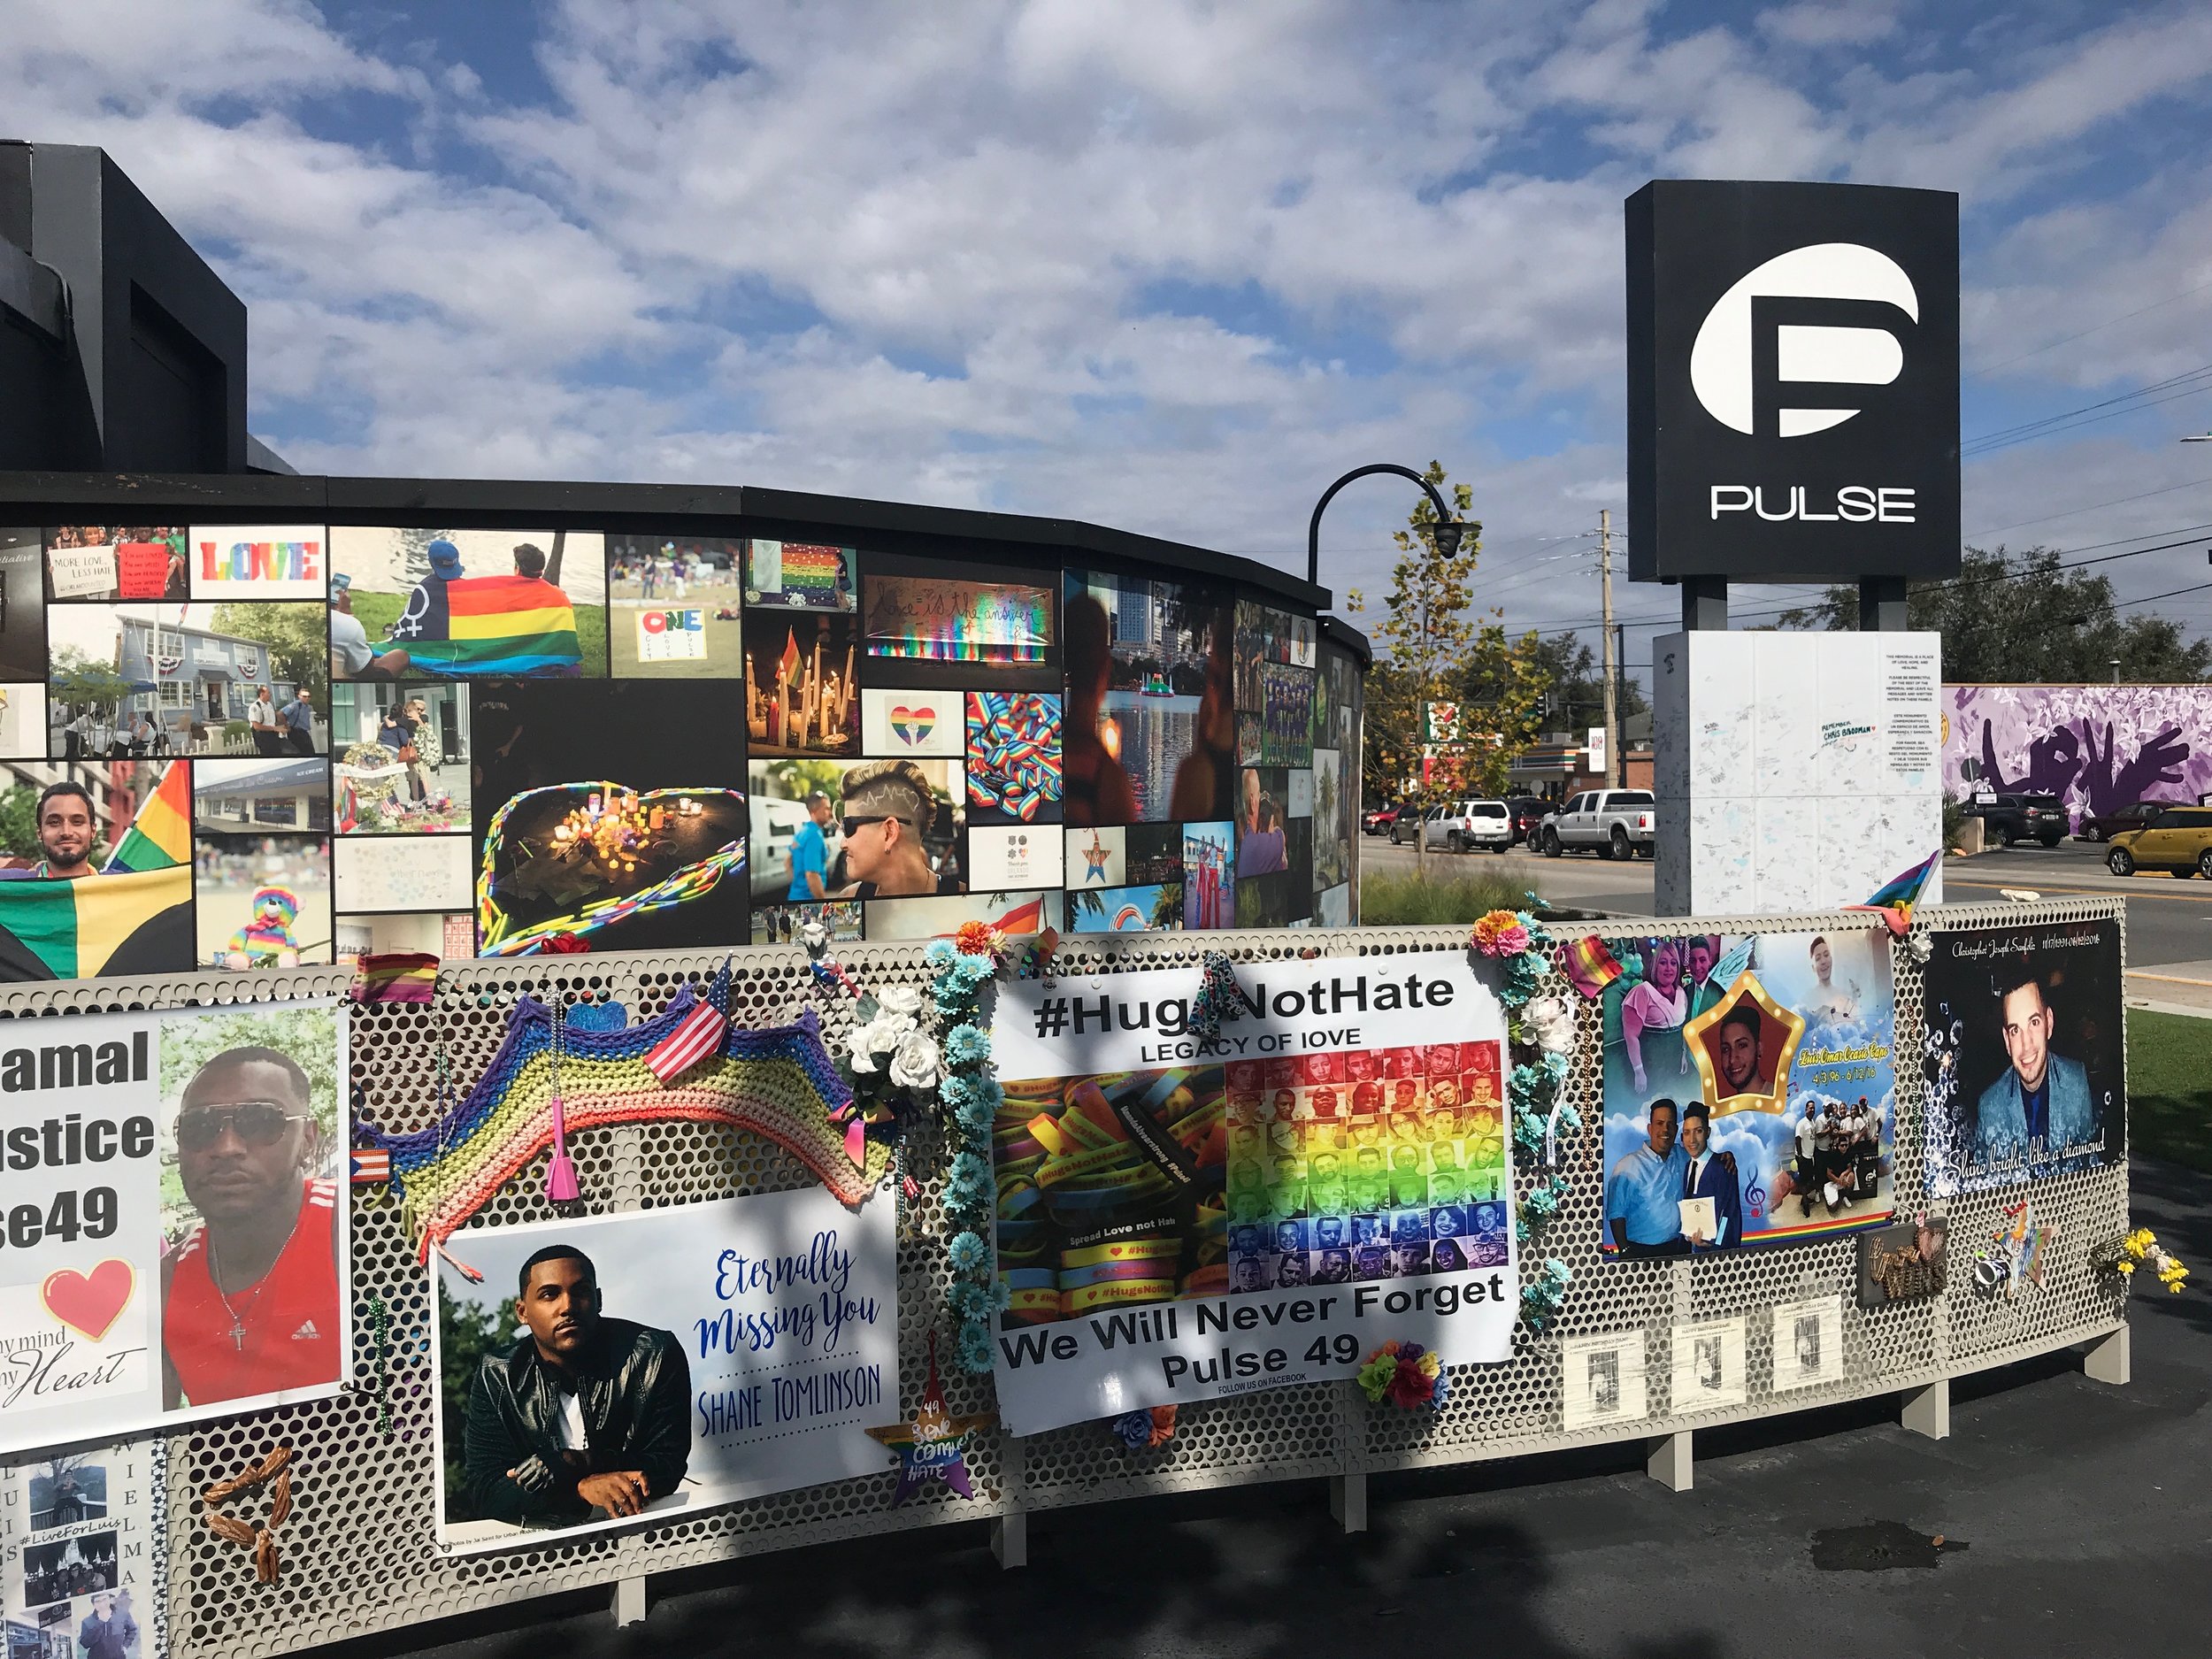  Photos and remembrances of shooting victims cover the wall surrounding the Pulse nightclub in Orlando, Fla., where 49 people were killed in 2016.      